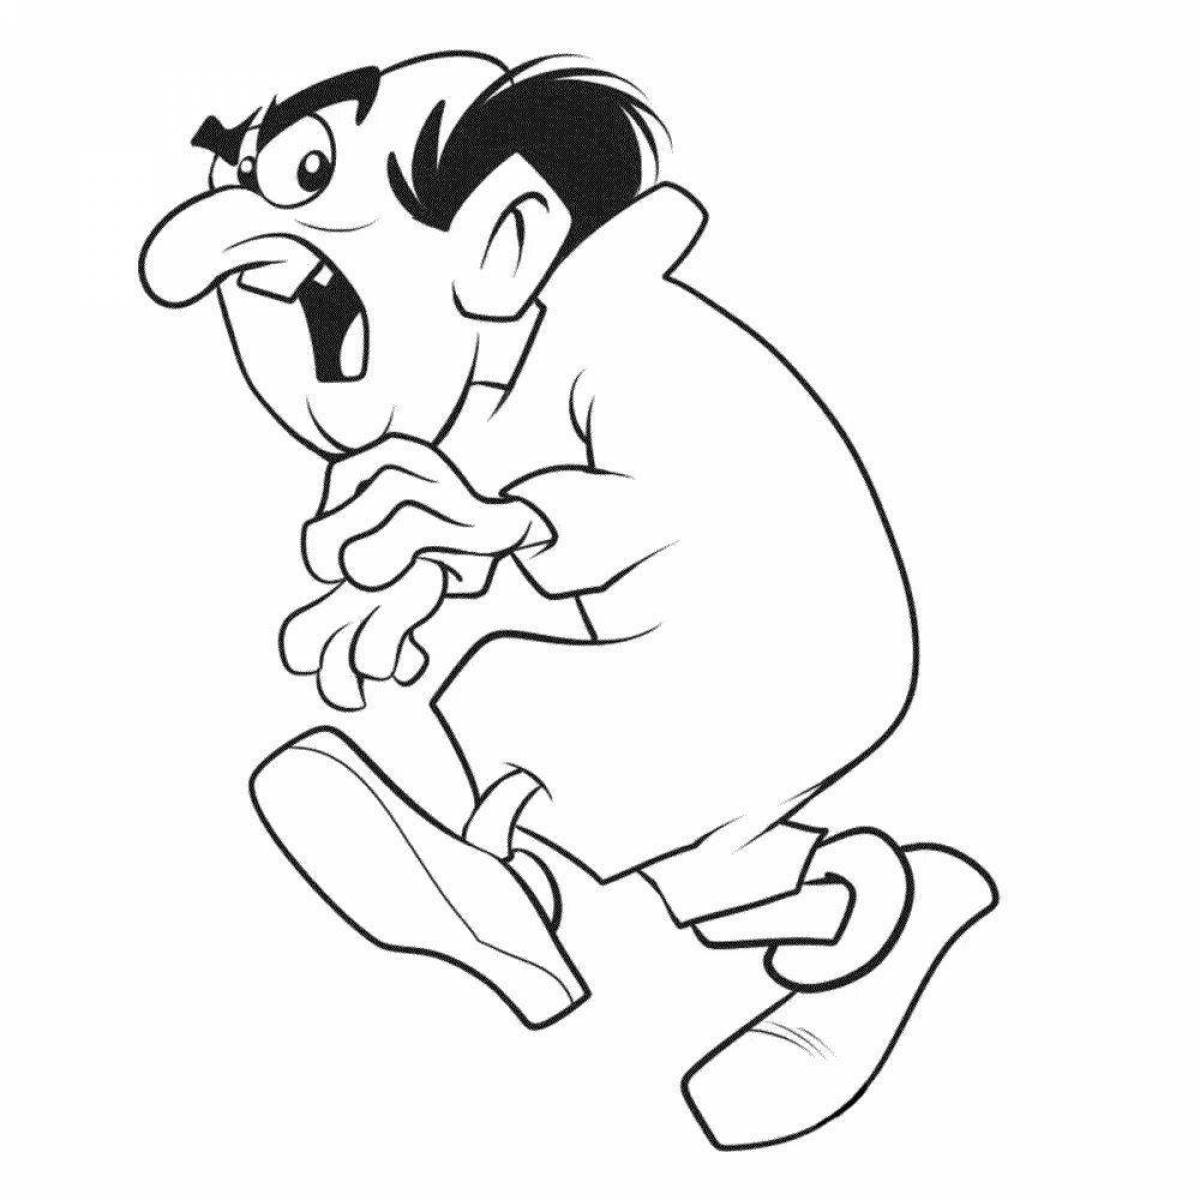 Witty gargamel coloring book